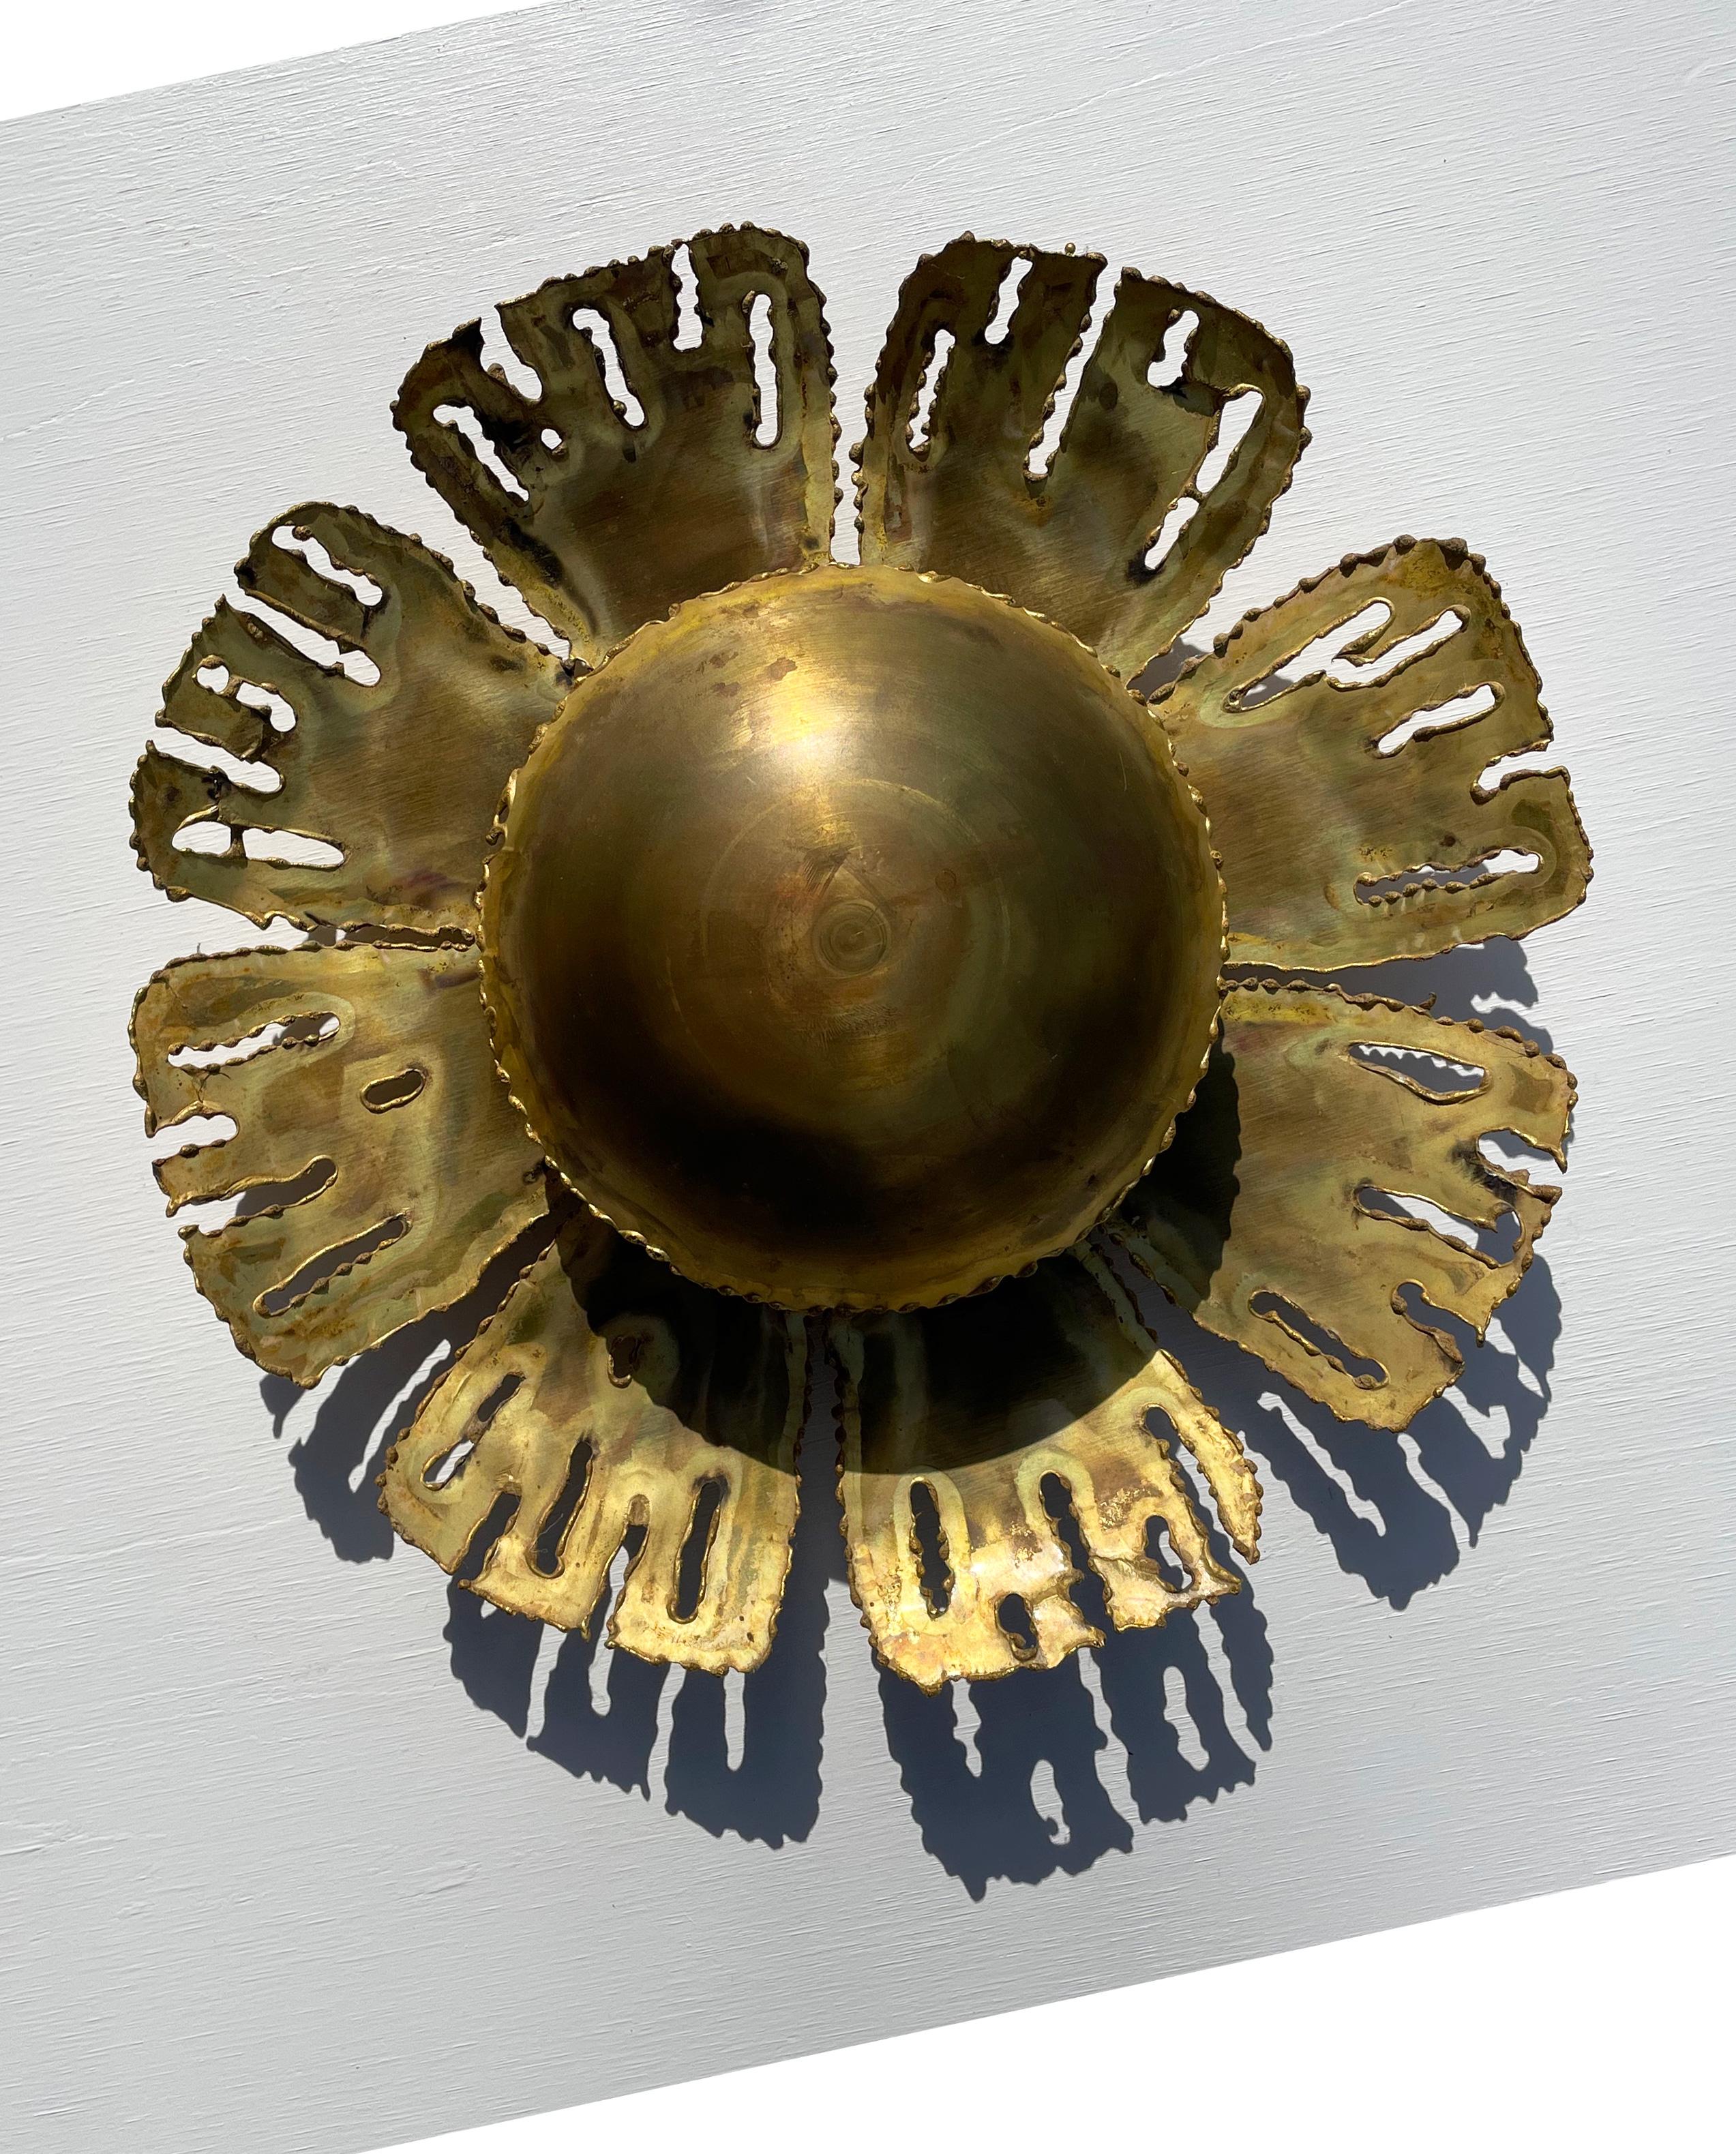 Danish Mid-Century Modern brutalist rustic brass wall light in the shape of a large flower with eight leaves surrounding a big round shiny center. Designed by the versatile Dane Svend Aage Holm Sørensen for his own company Holm Sørensen & Co. in the